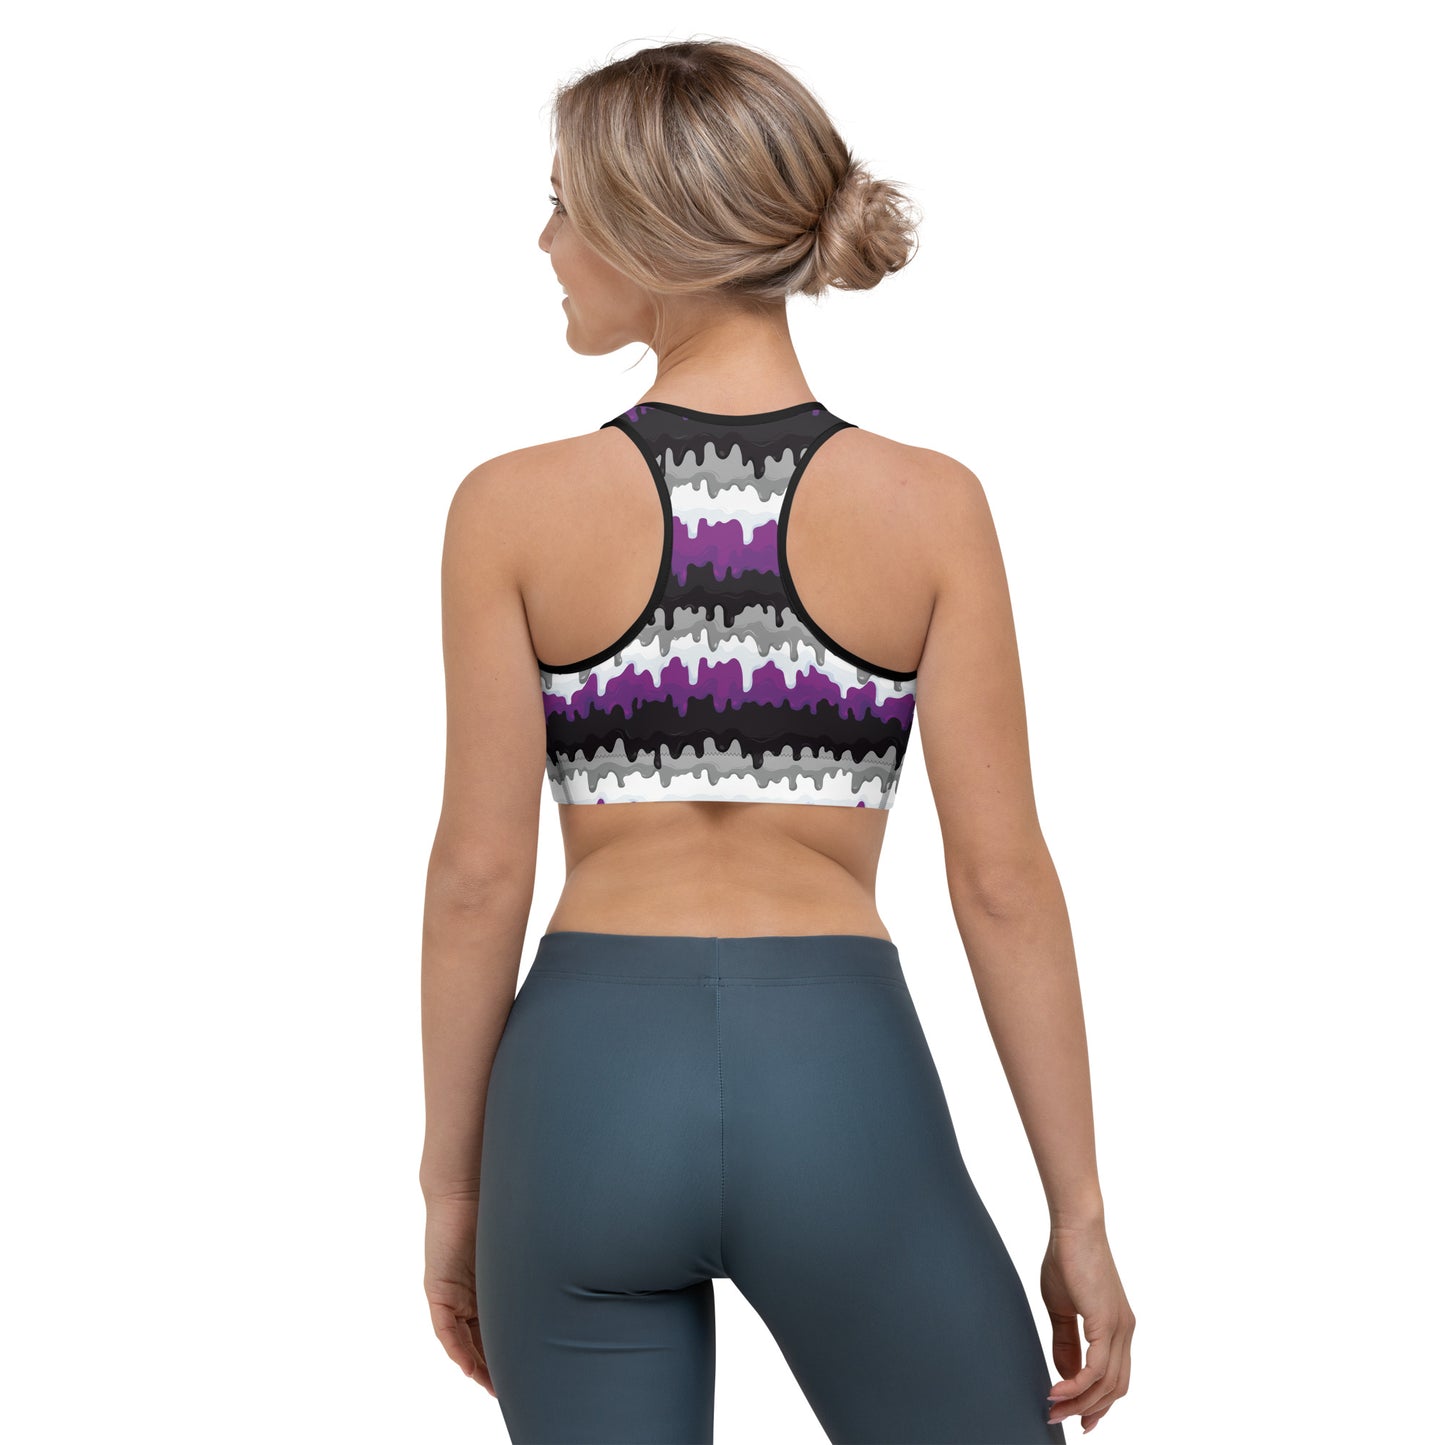 Asexual Pride Sports Bra - LGBTQIA Black, Gray, Purple, and White Flag Activewear - Parade Club Running